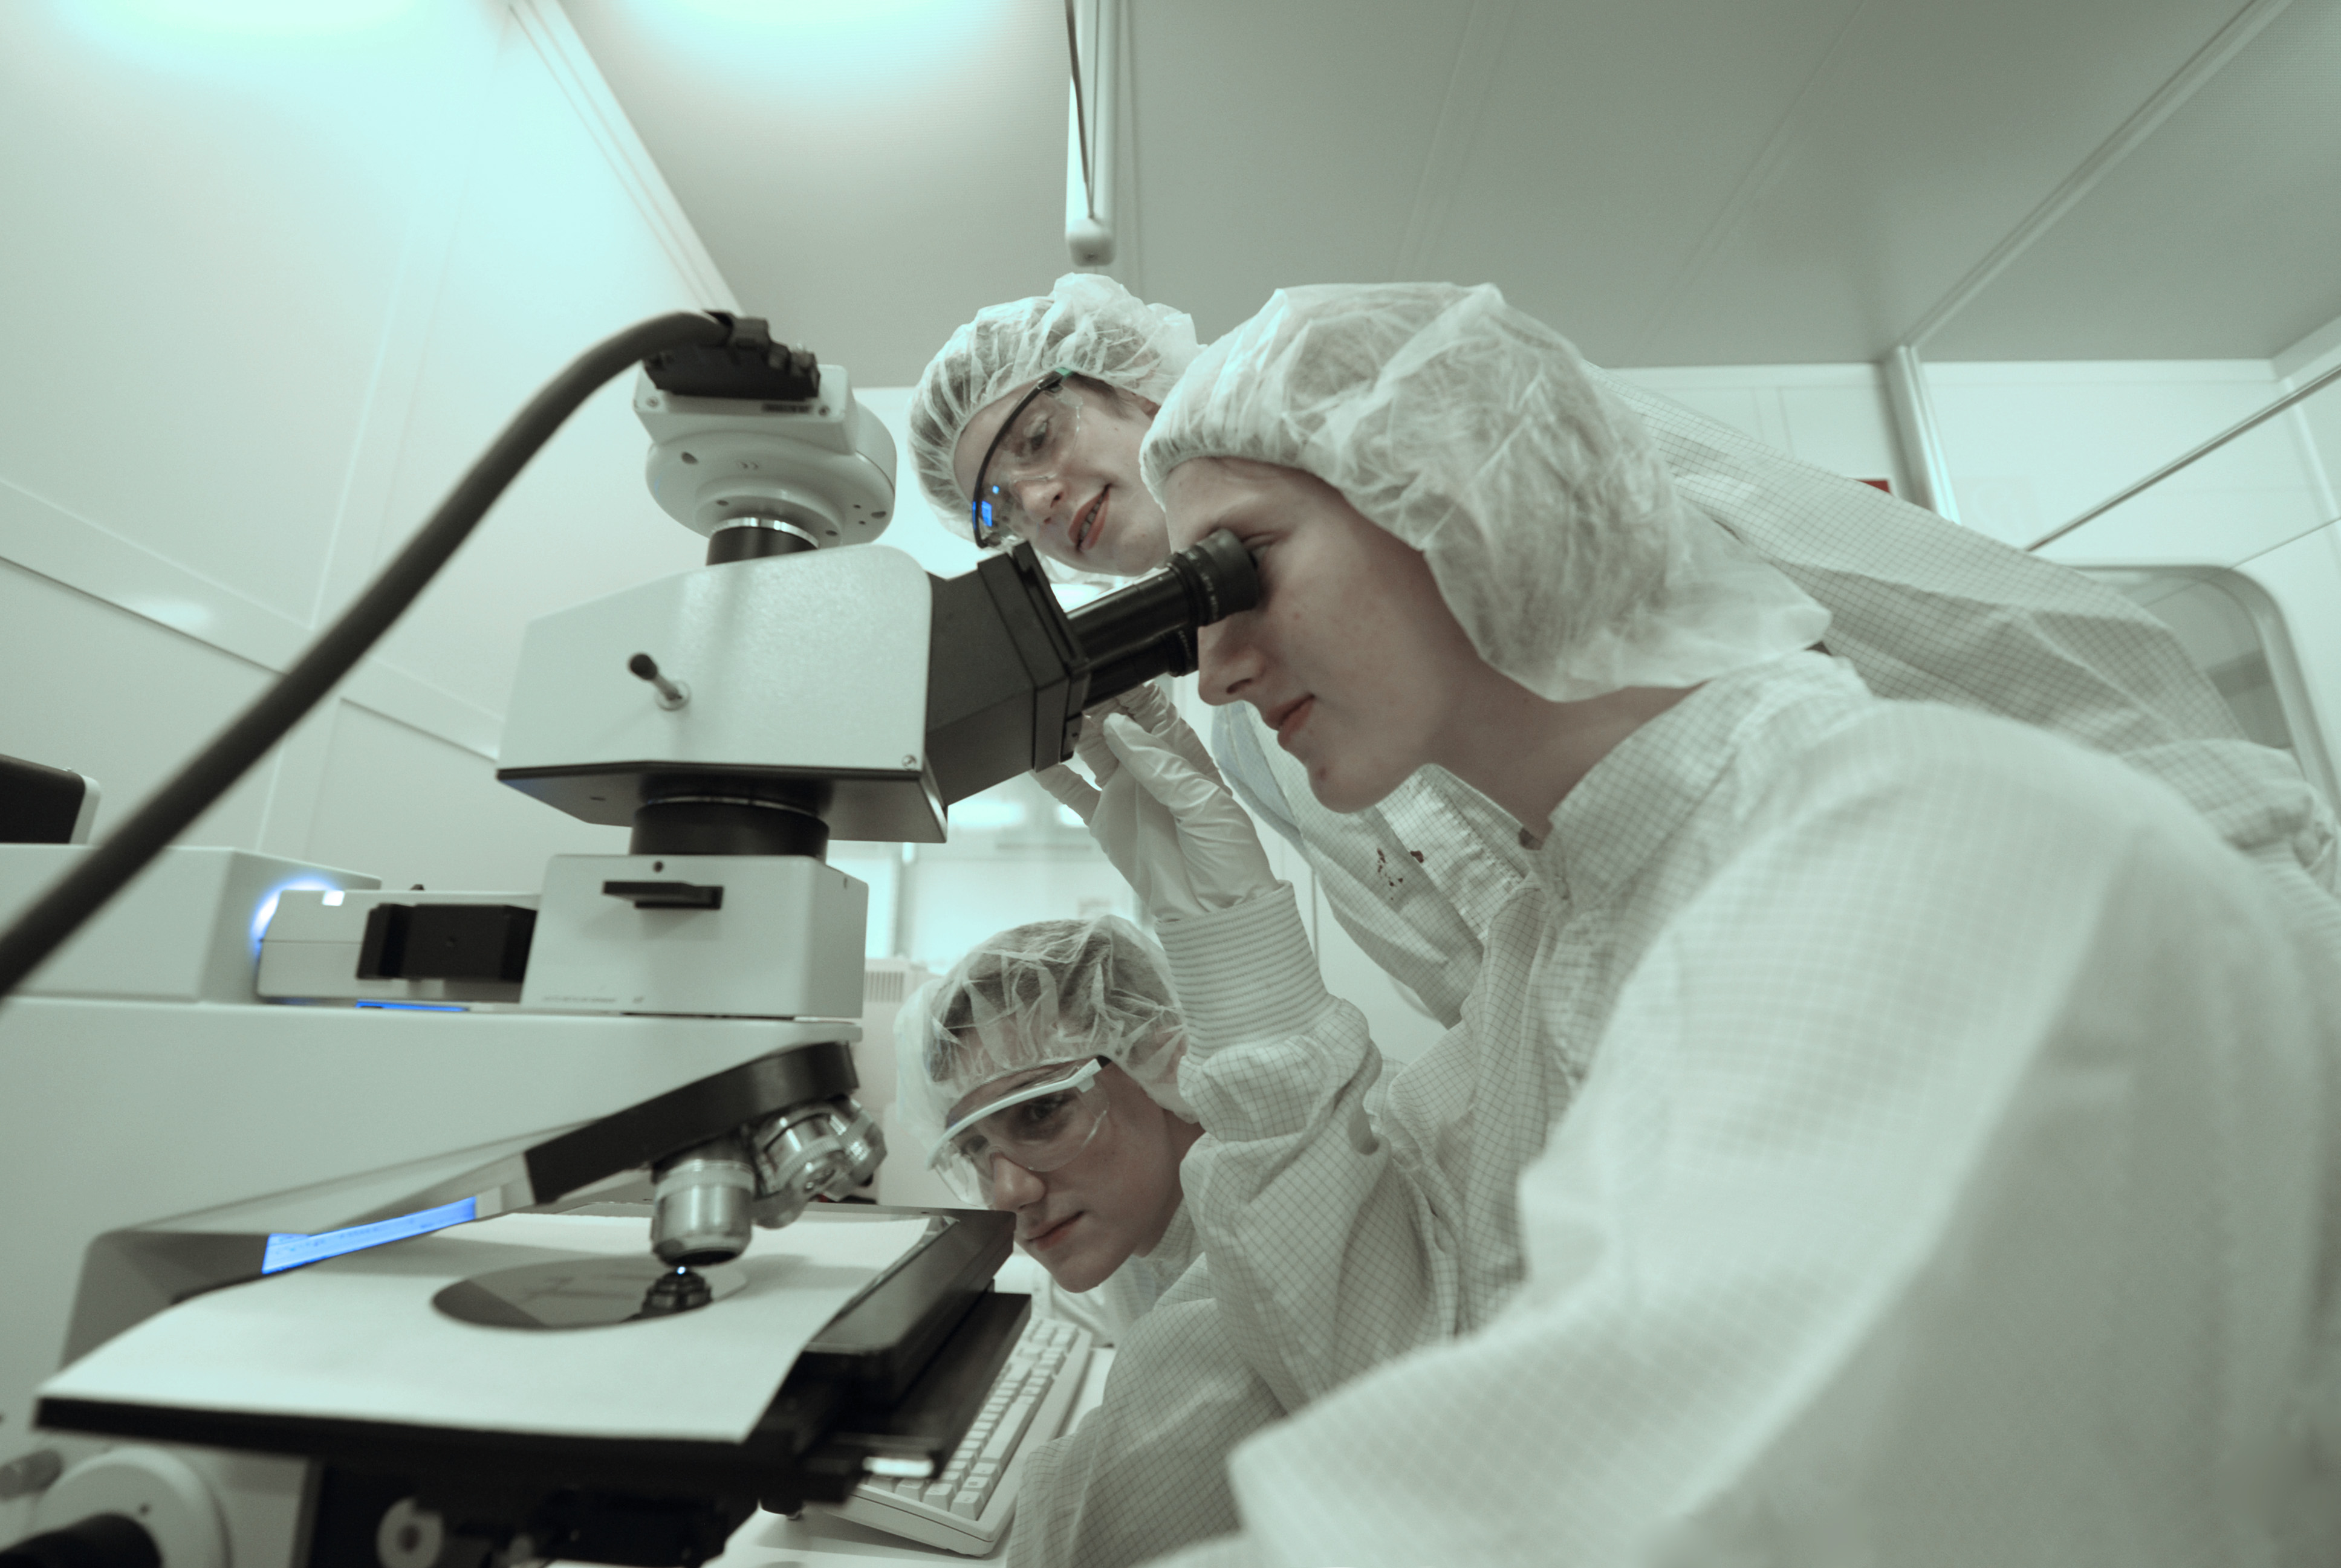 Several researchers stand around a microscope in a laboratory wearing white protective suits.